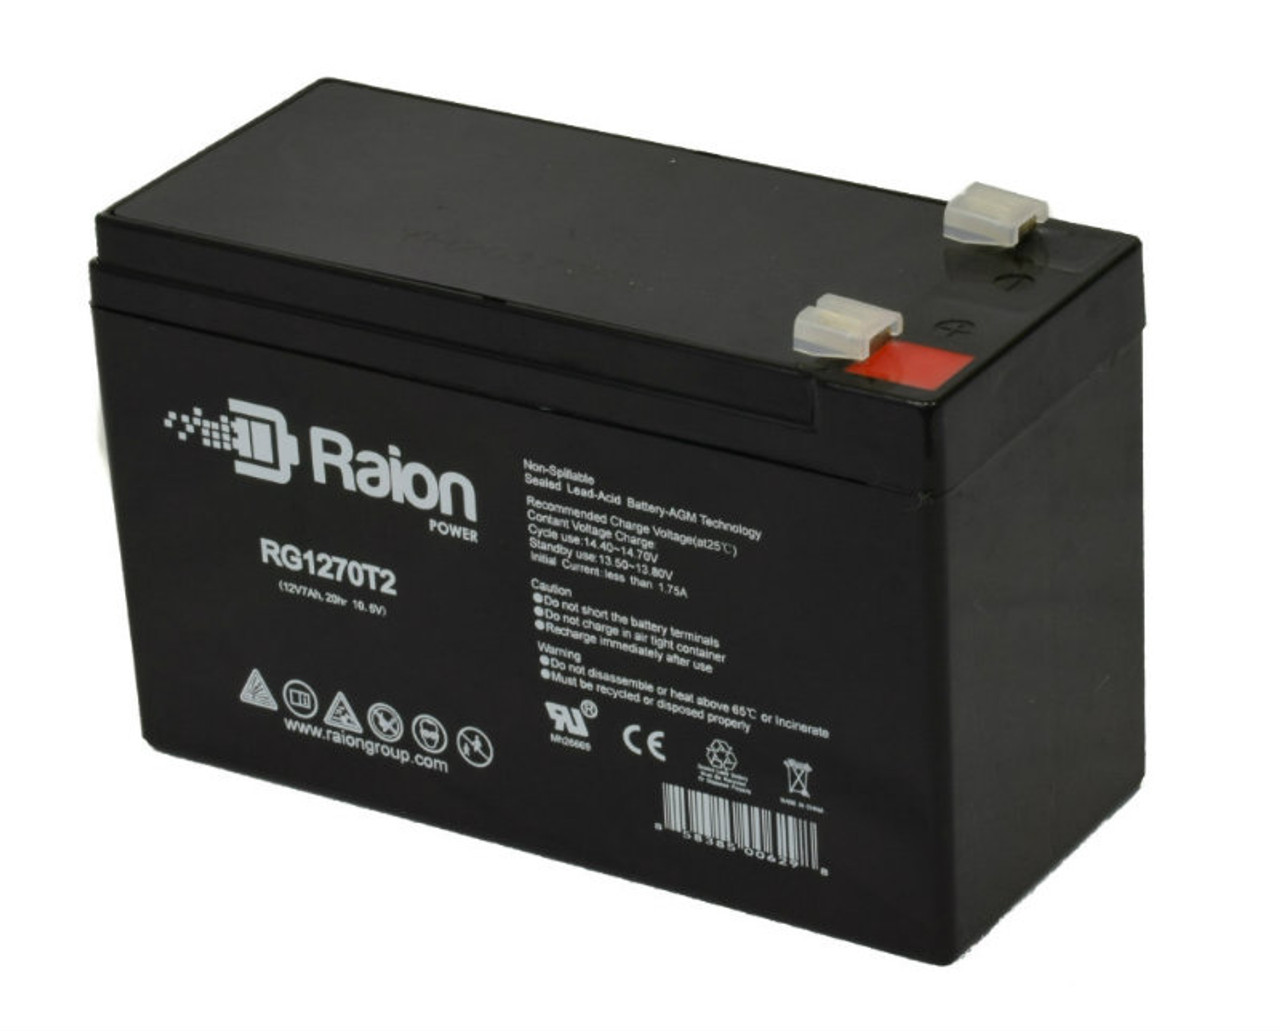 Raion Power Replacement 12V 7Ah Battery for Gambro Engstrom 9651 Kebo Scale - 1 Pack